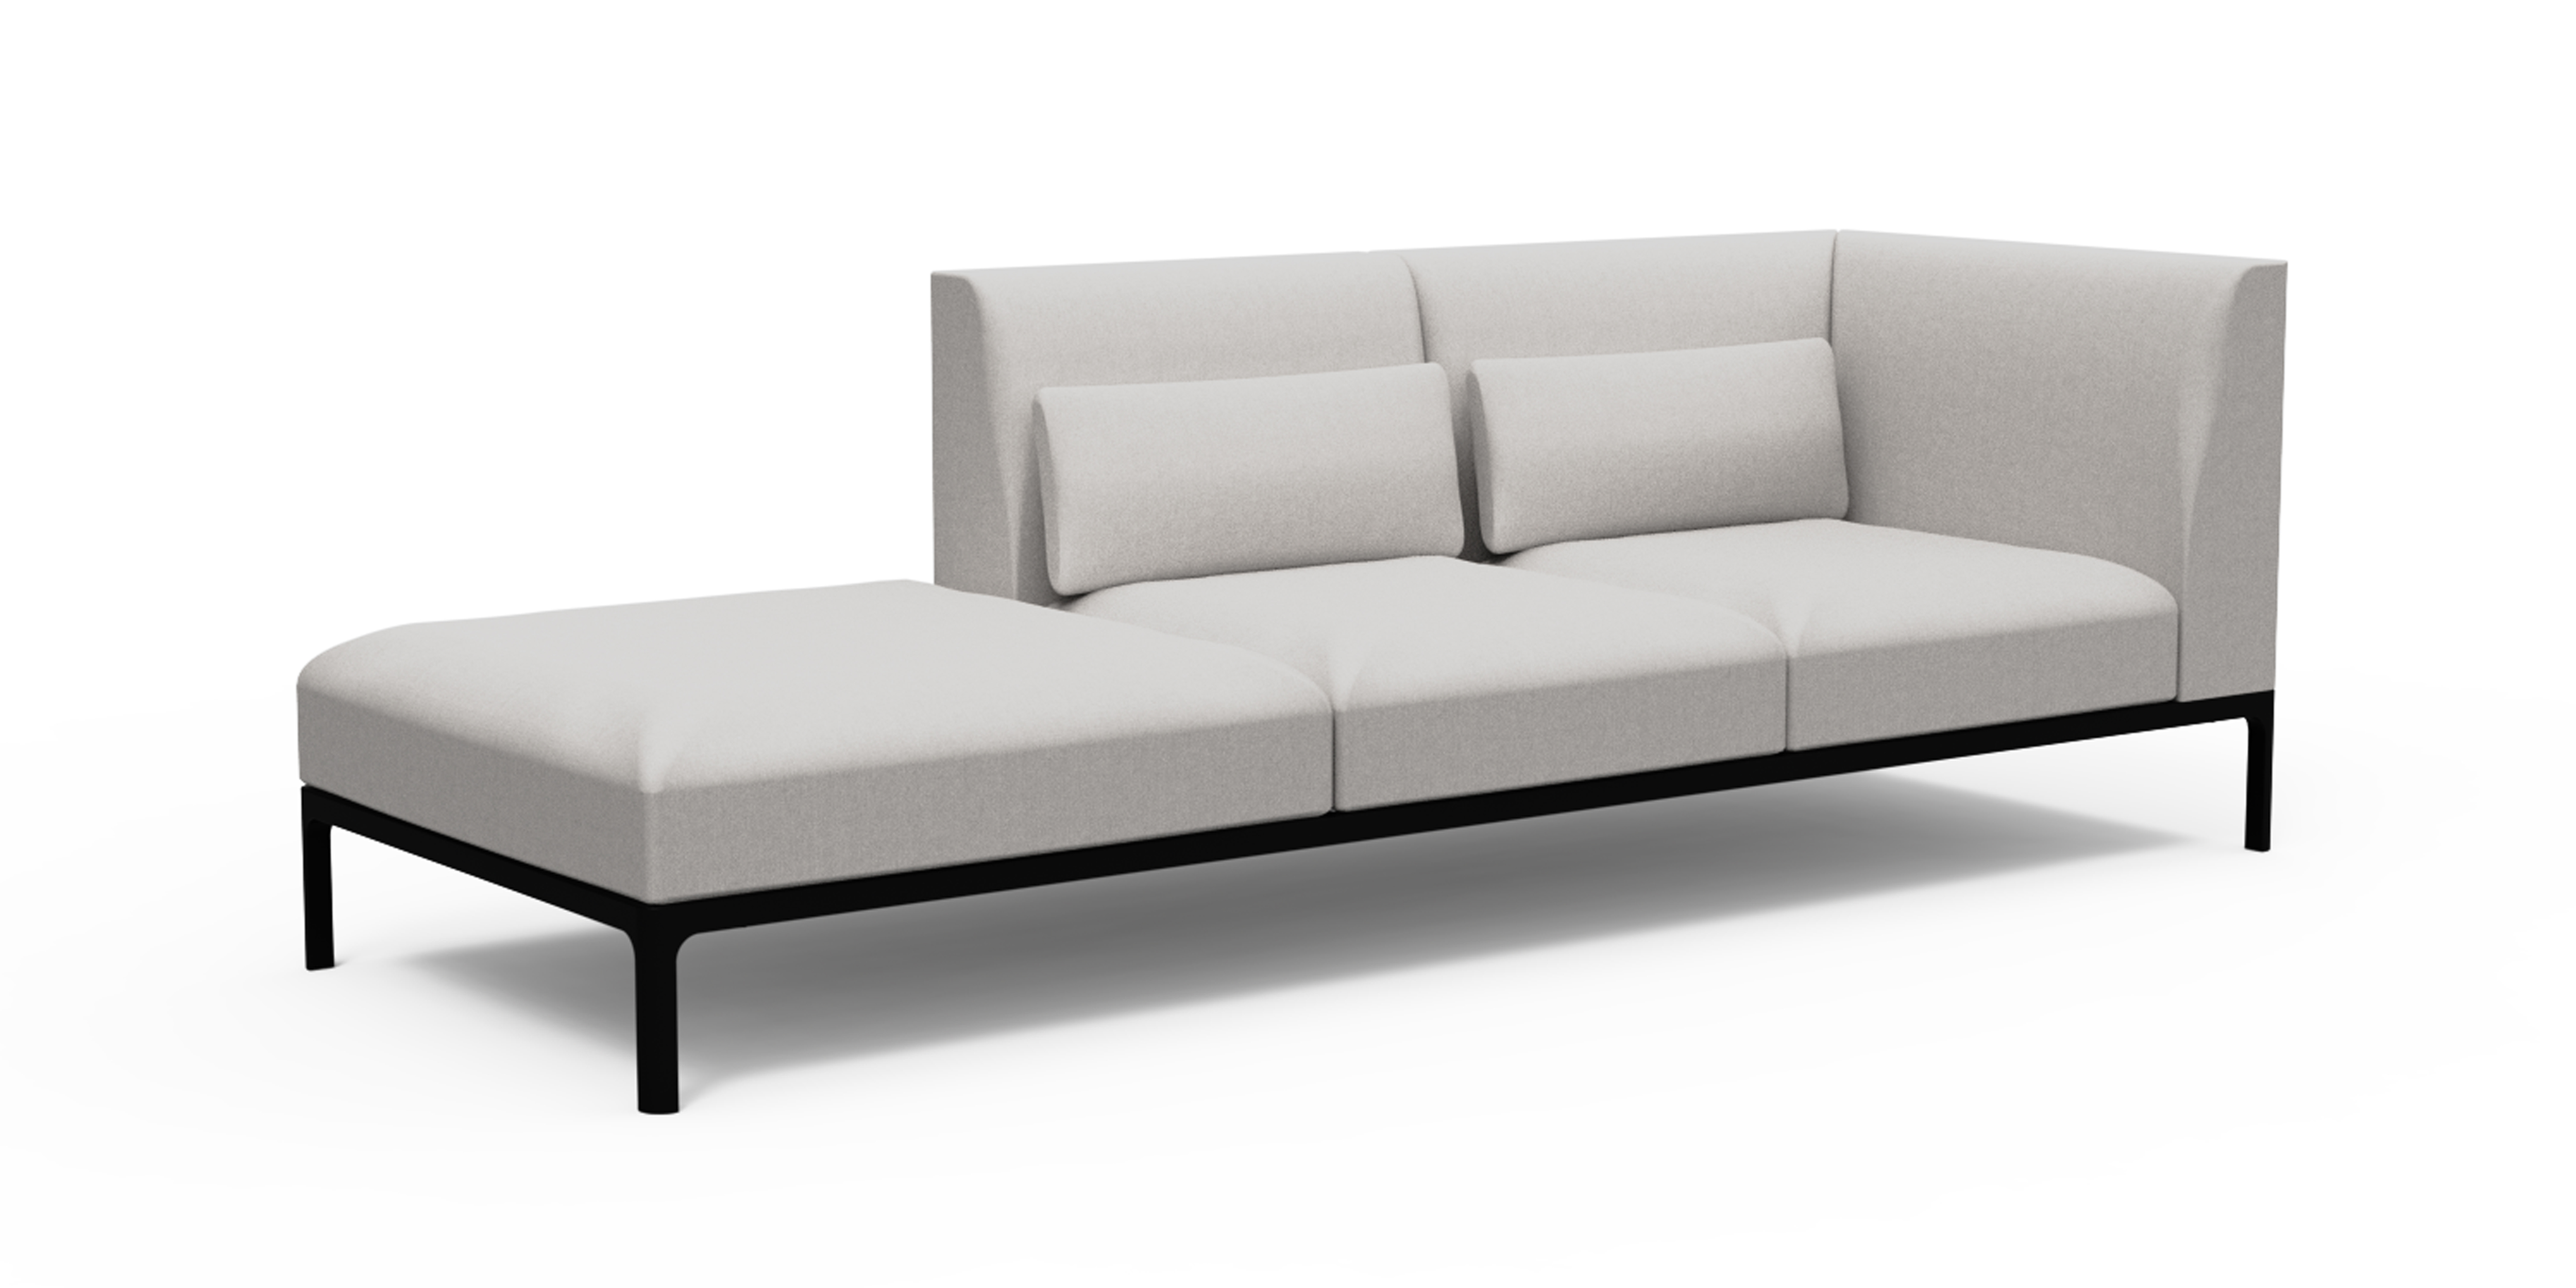 WS - Profile Sofa - 3-seater Daybed right (Light grey)